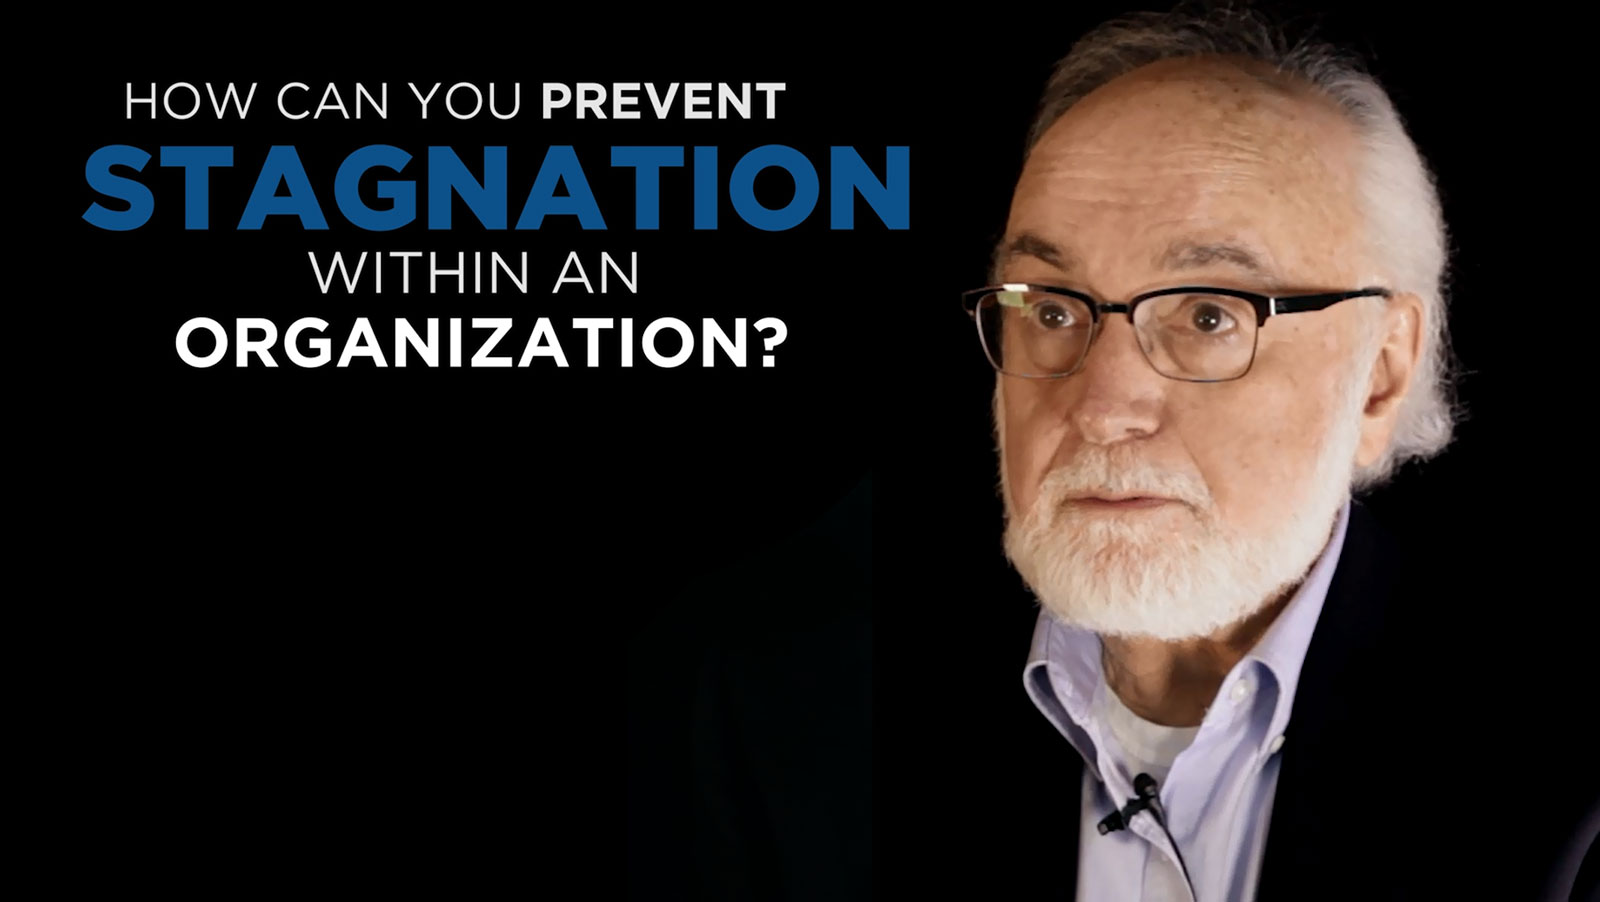 Dr. Sam Liggero - Shared Experience - How can you prevent stagnation within an organization?